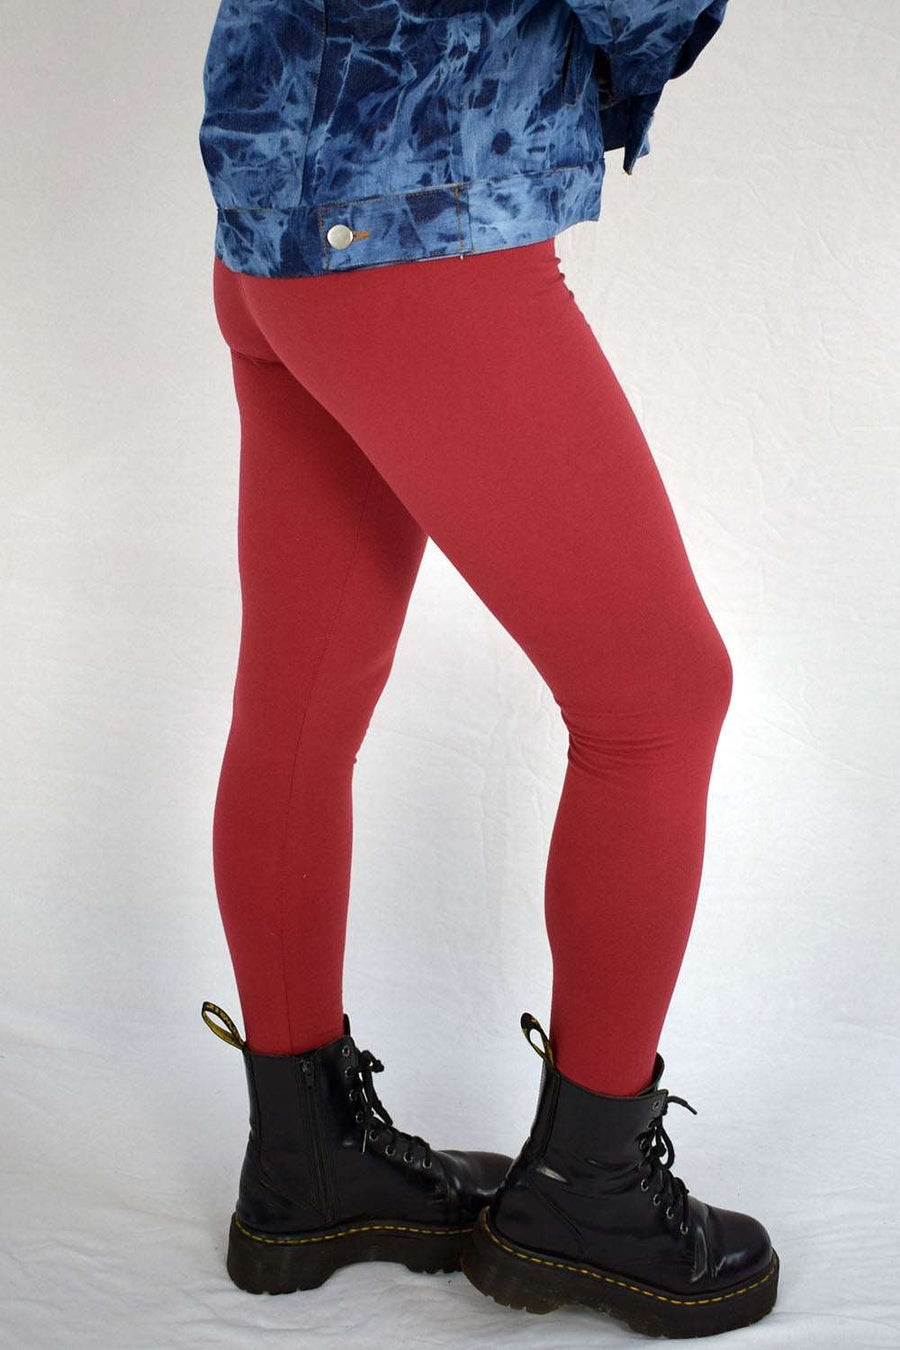 Womens Leggings High Waisted for Gym in Red!